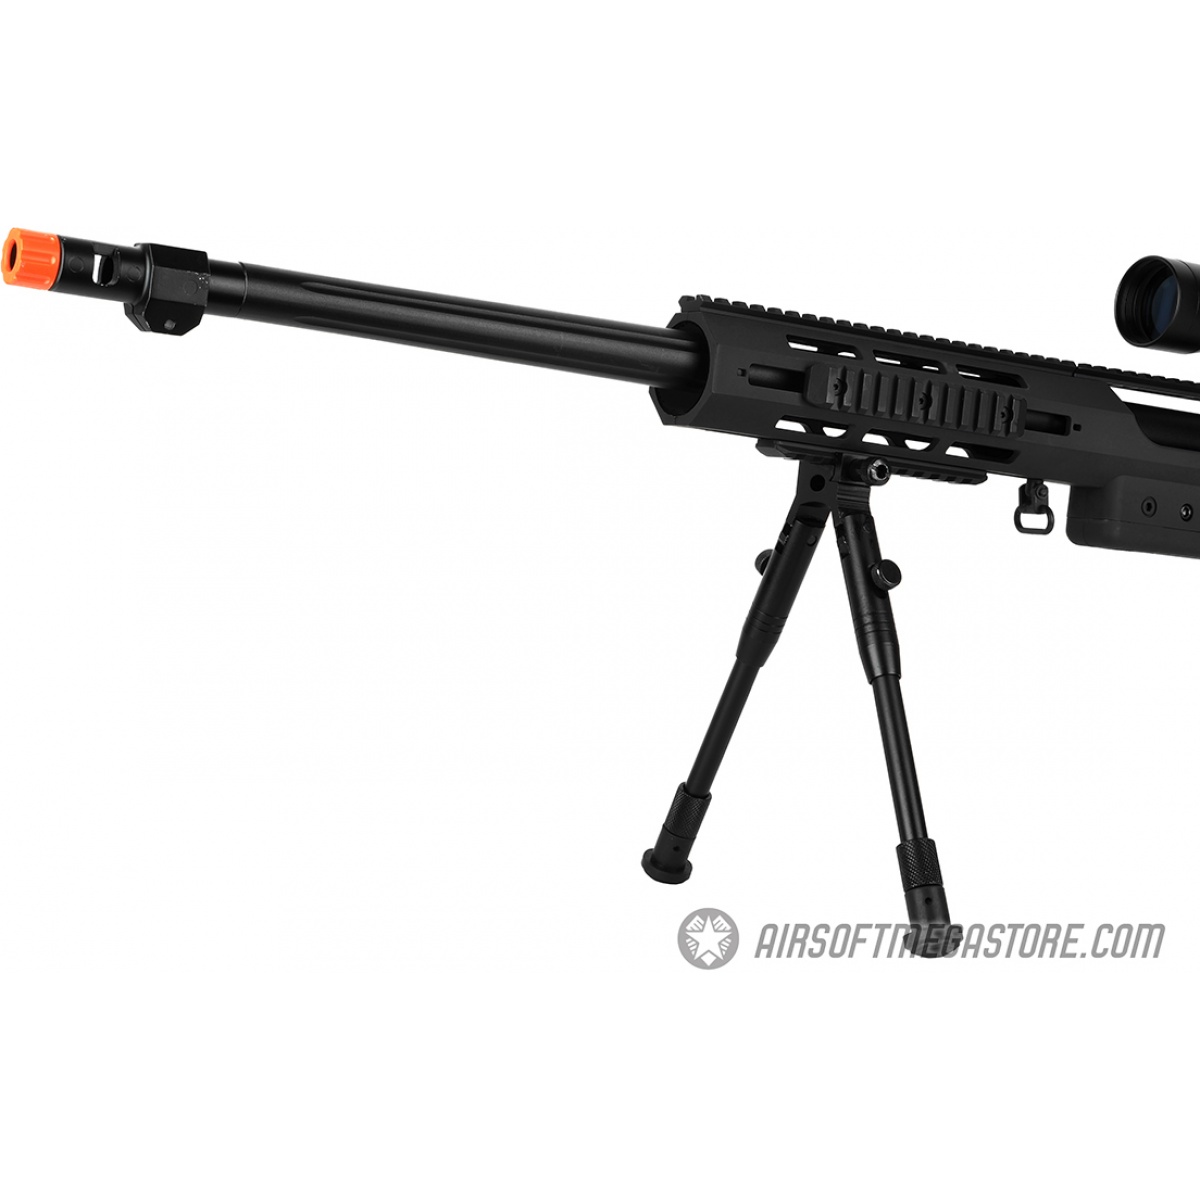 Well MB4411D With Scope And Bipod Airsoft Sniper Black